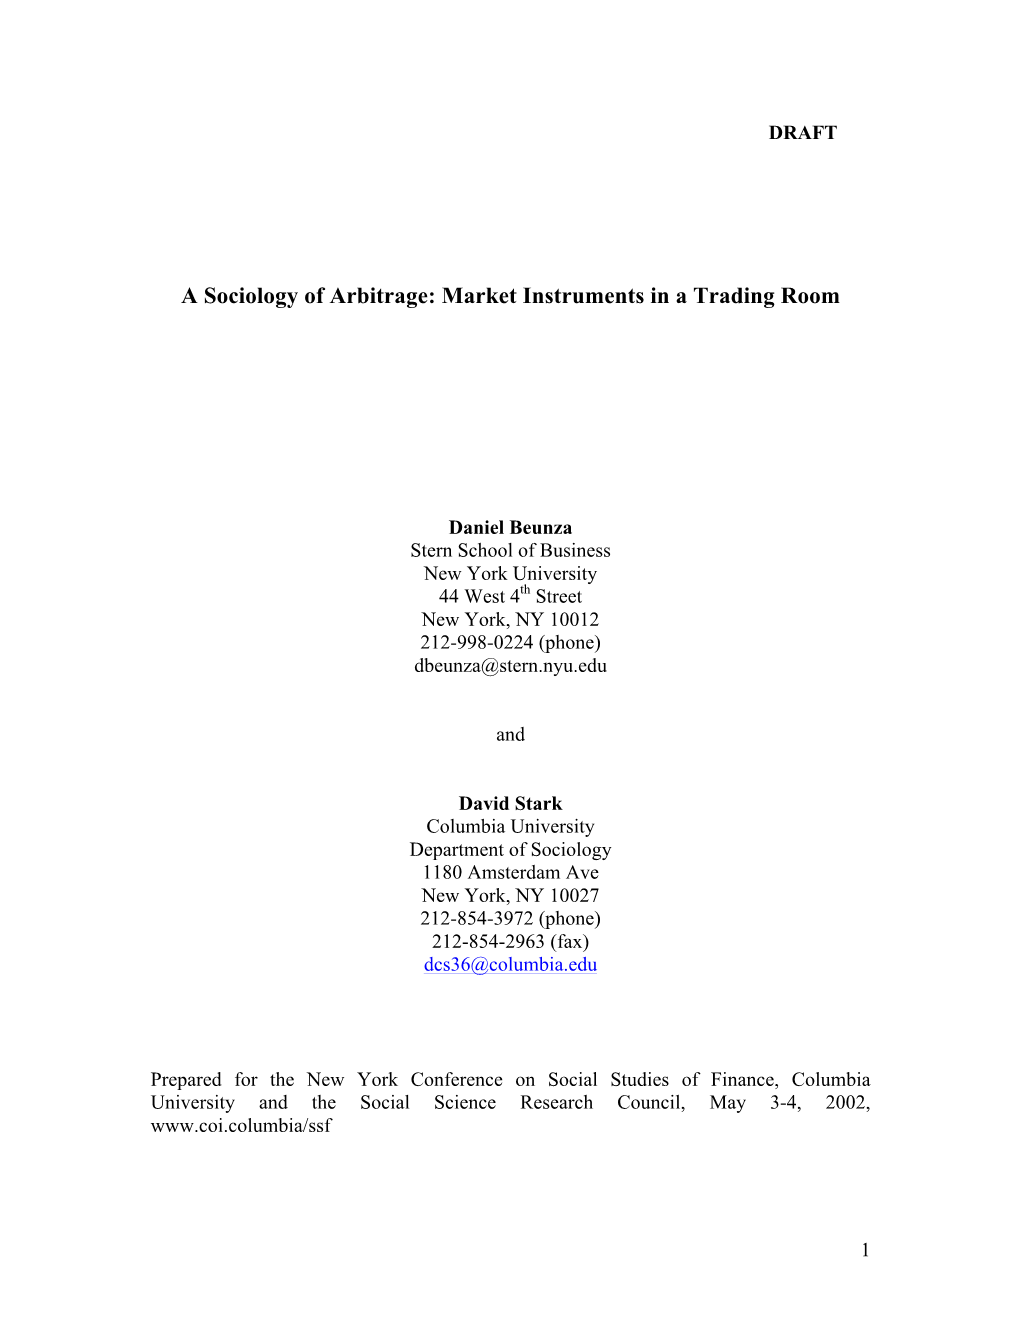 A Sociology of Arbitrage: Market Instruments in a Trading Room